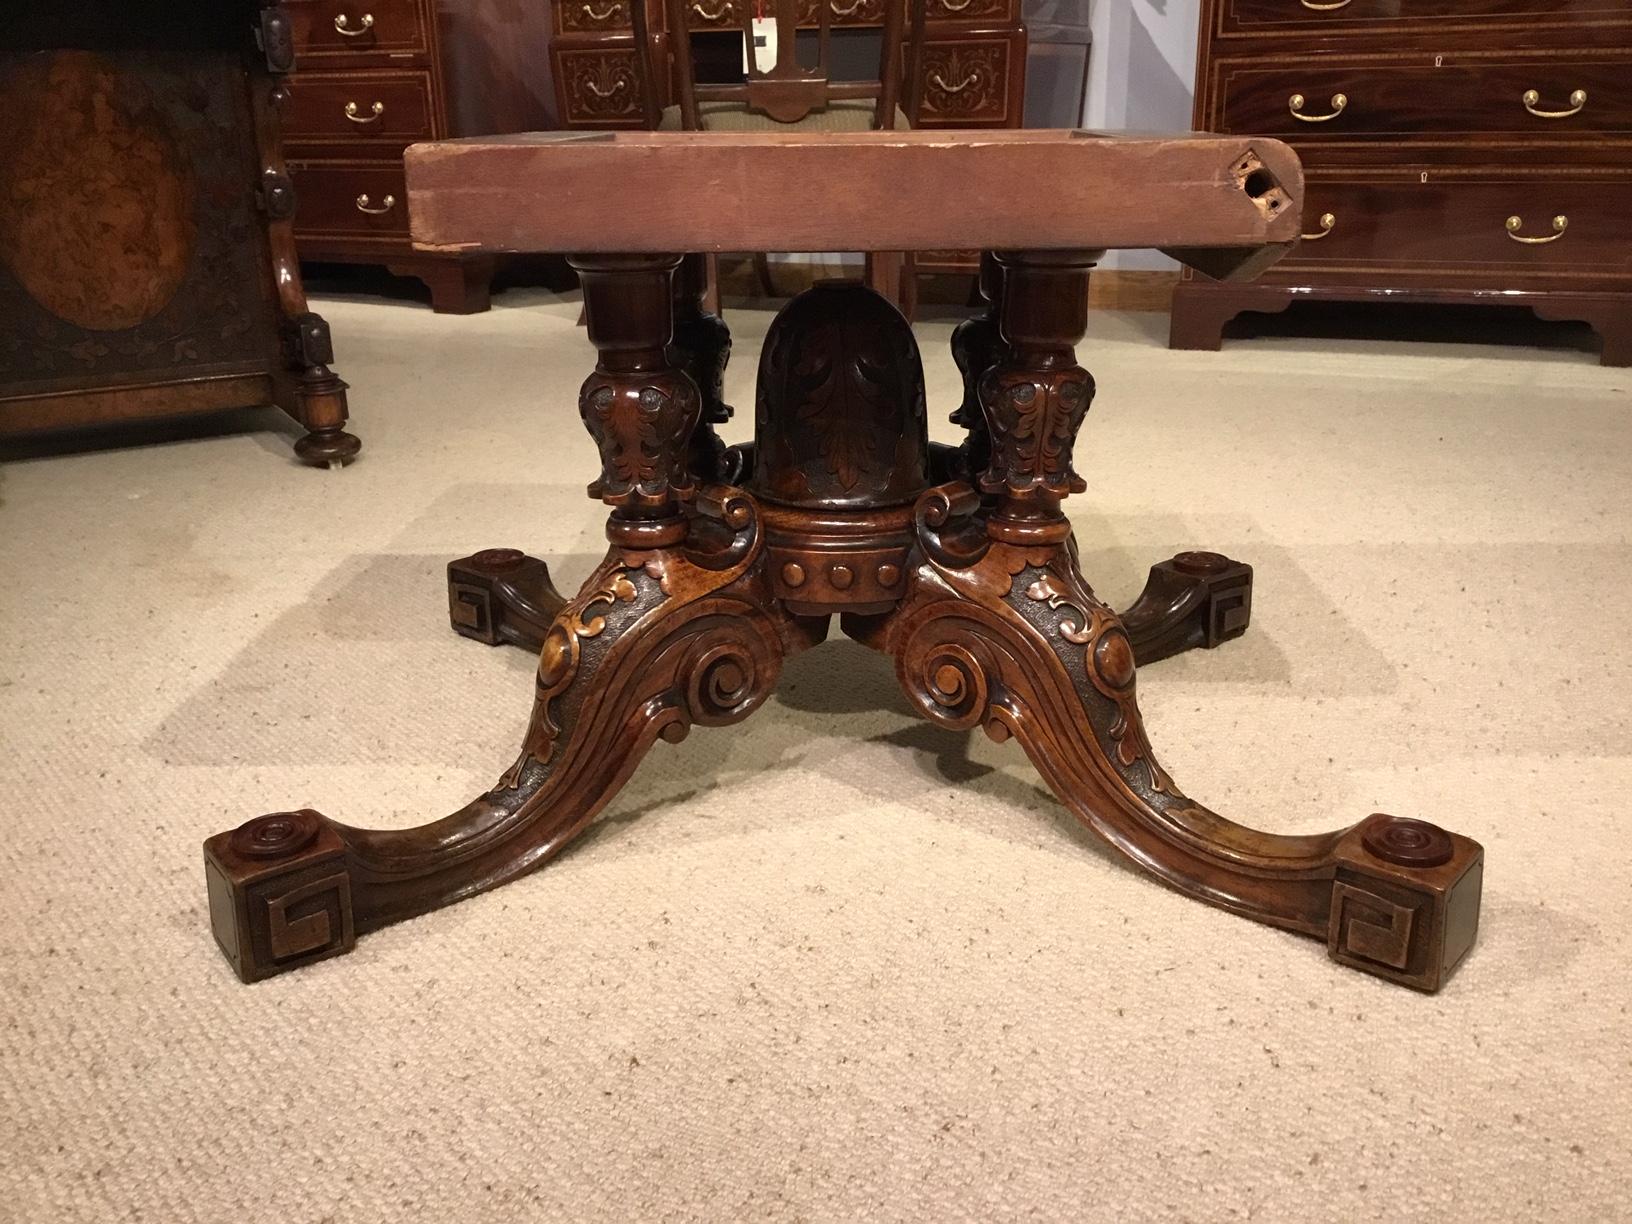 A fine quality burr walnut Victorian period oval antique coffee table. Having an oval top veneered in finely figured burr walnut with four floral marquetry inlaid panels, banded in tulipwood and boxwood and supported on a central lobed column with